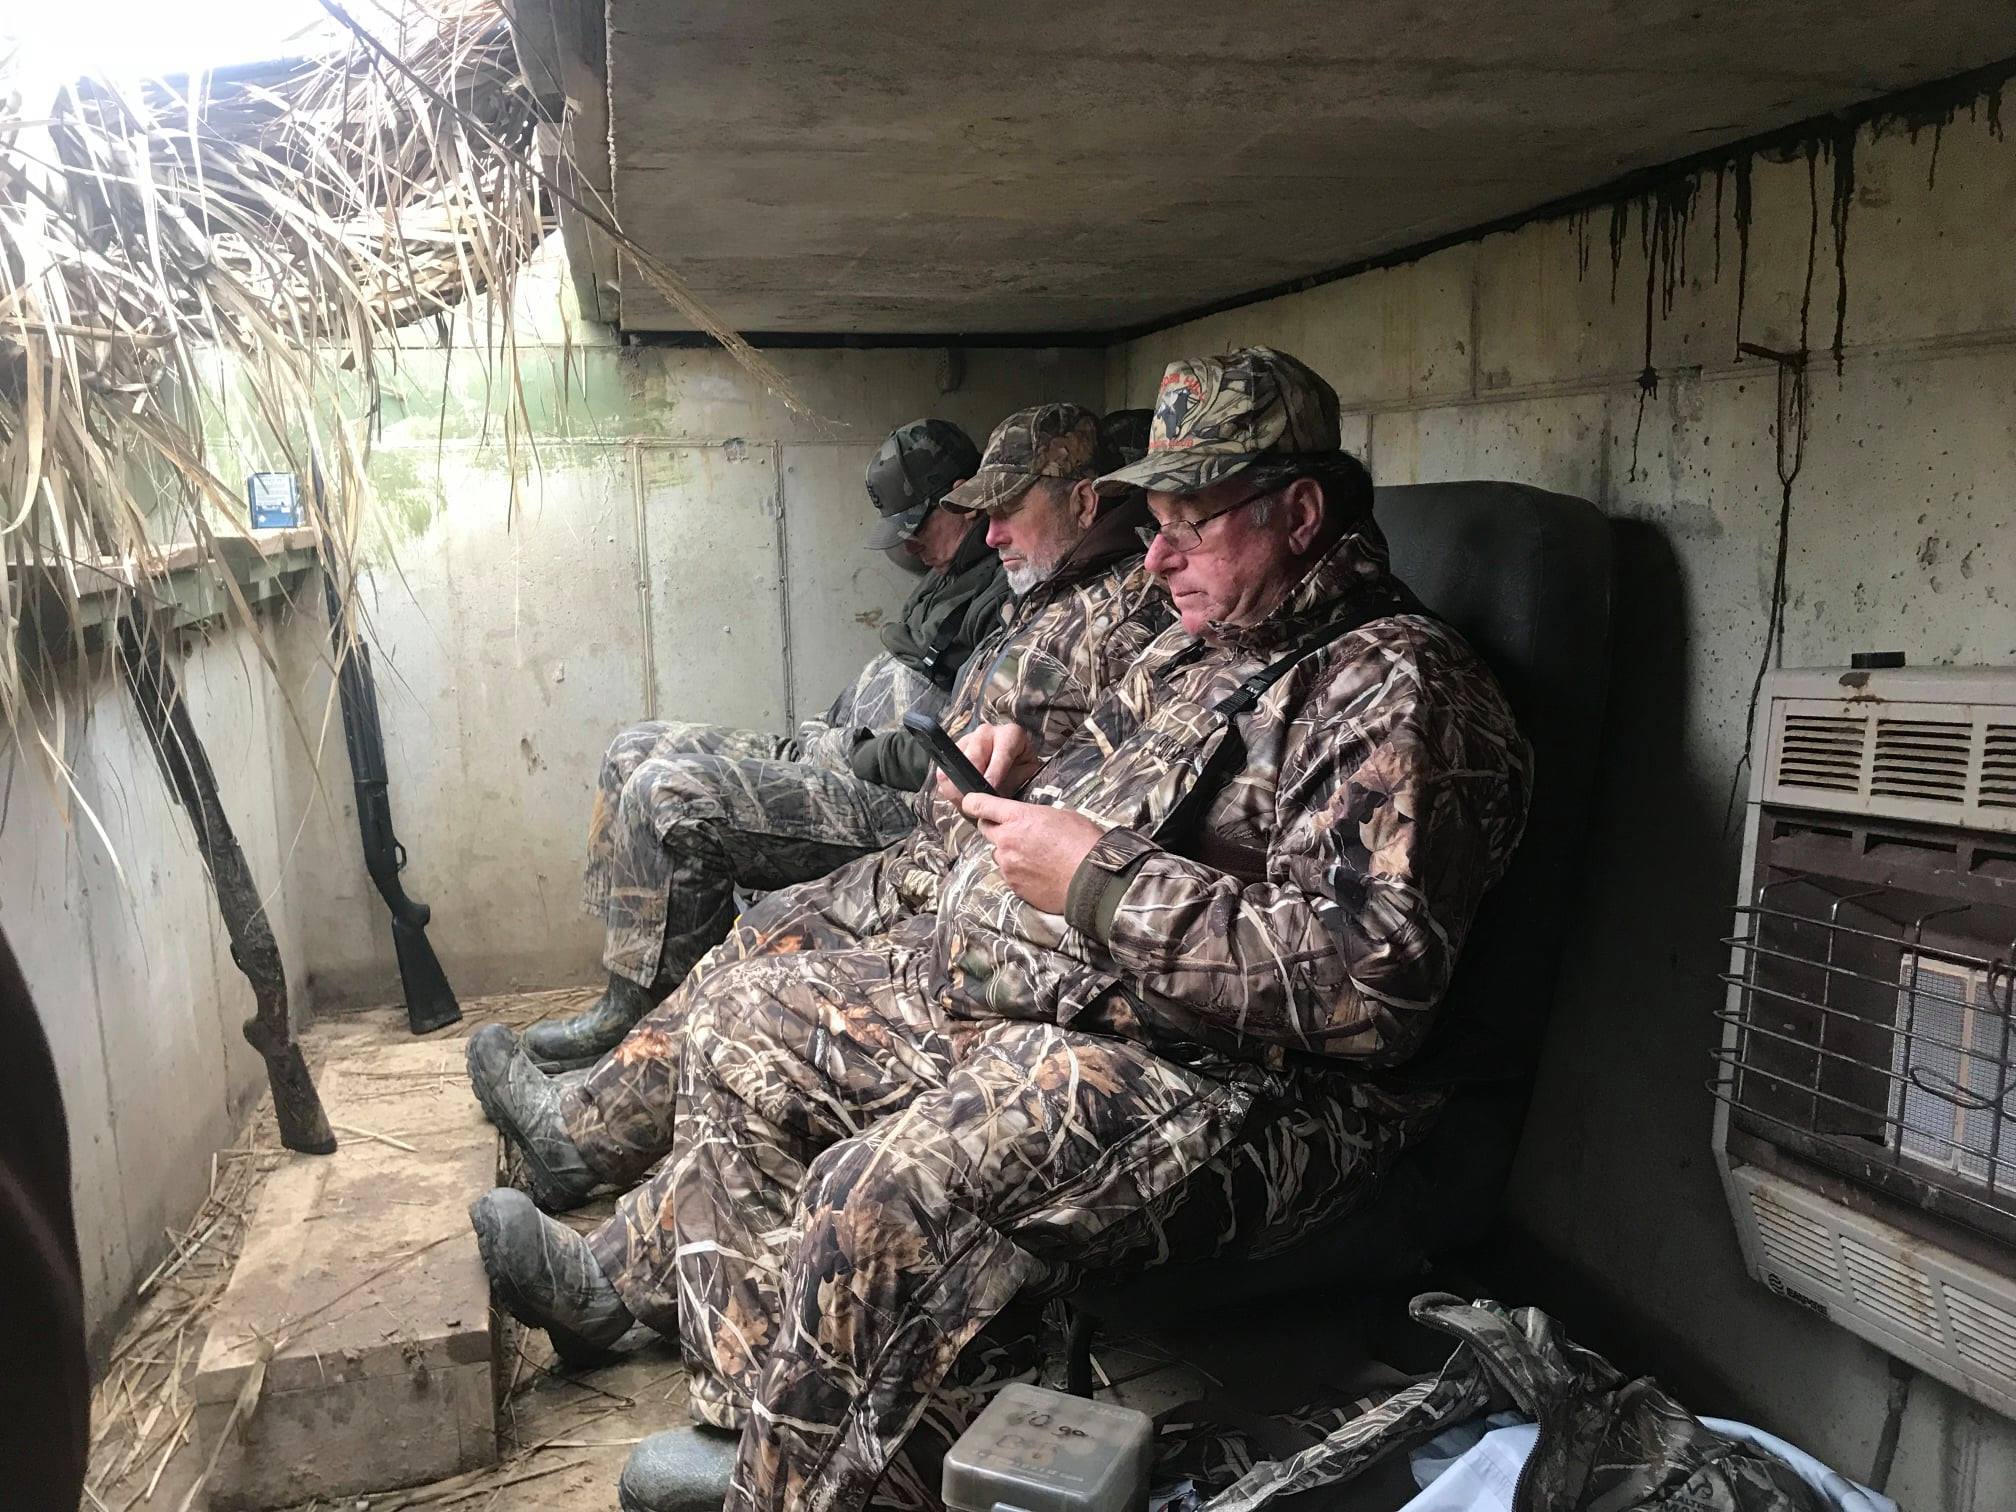 hunters waiting to hunt geese and ducks in southern illinois